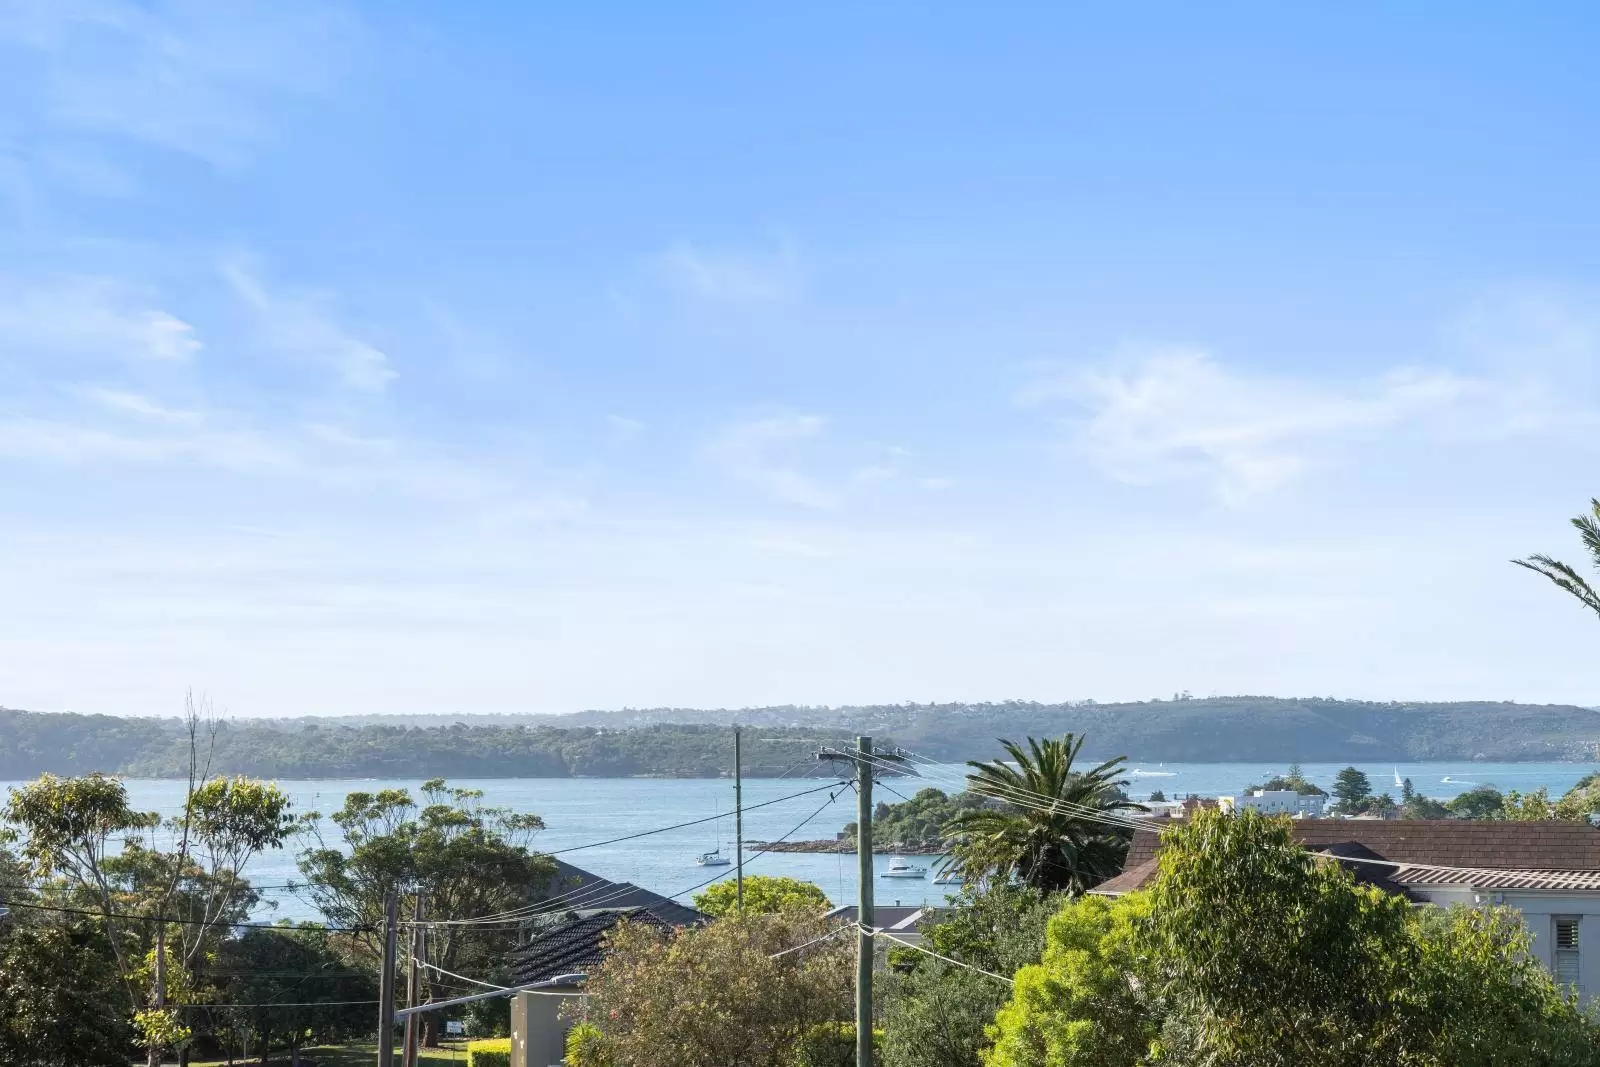 Photo #9: 13 Russell Street, Vaucluse - Leased by Sydney Sotheby's International Realty